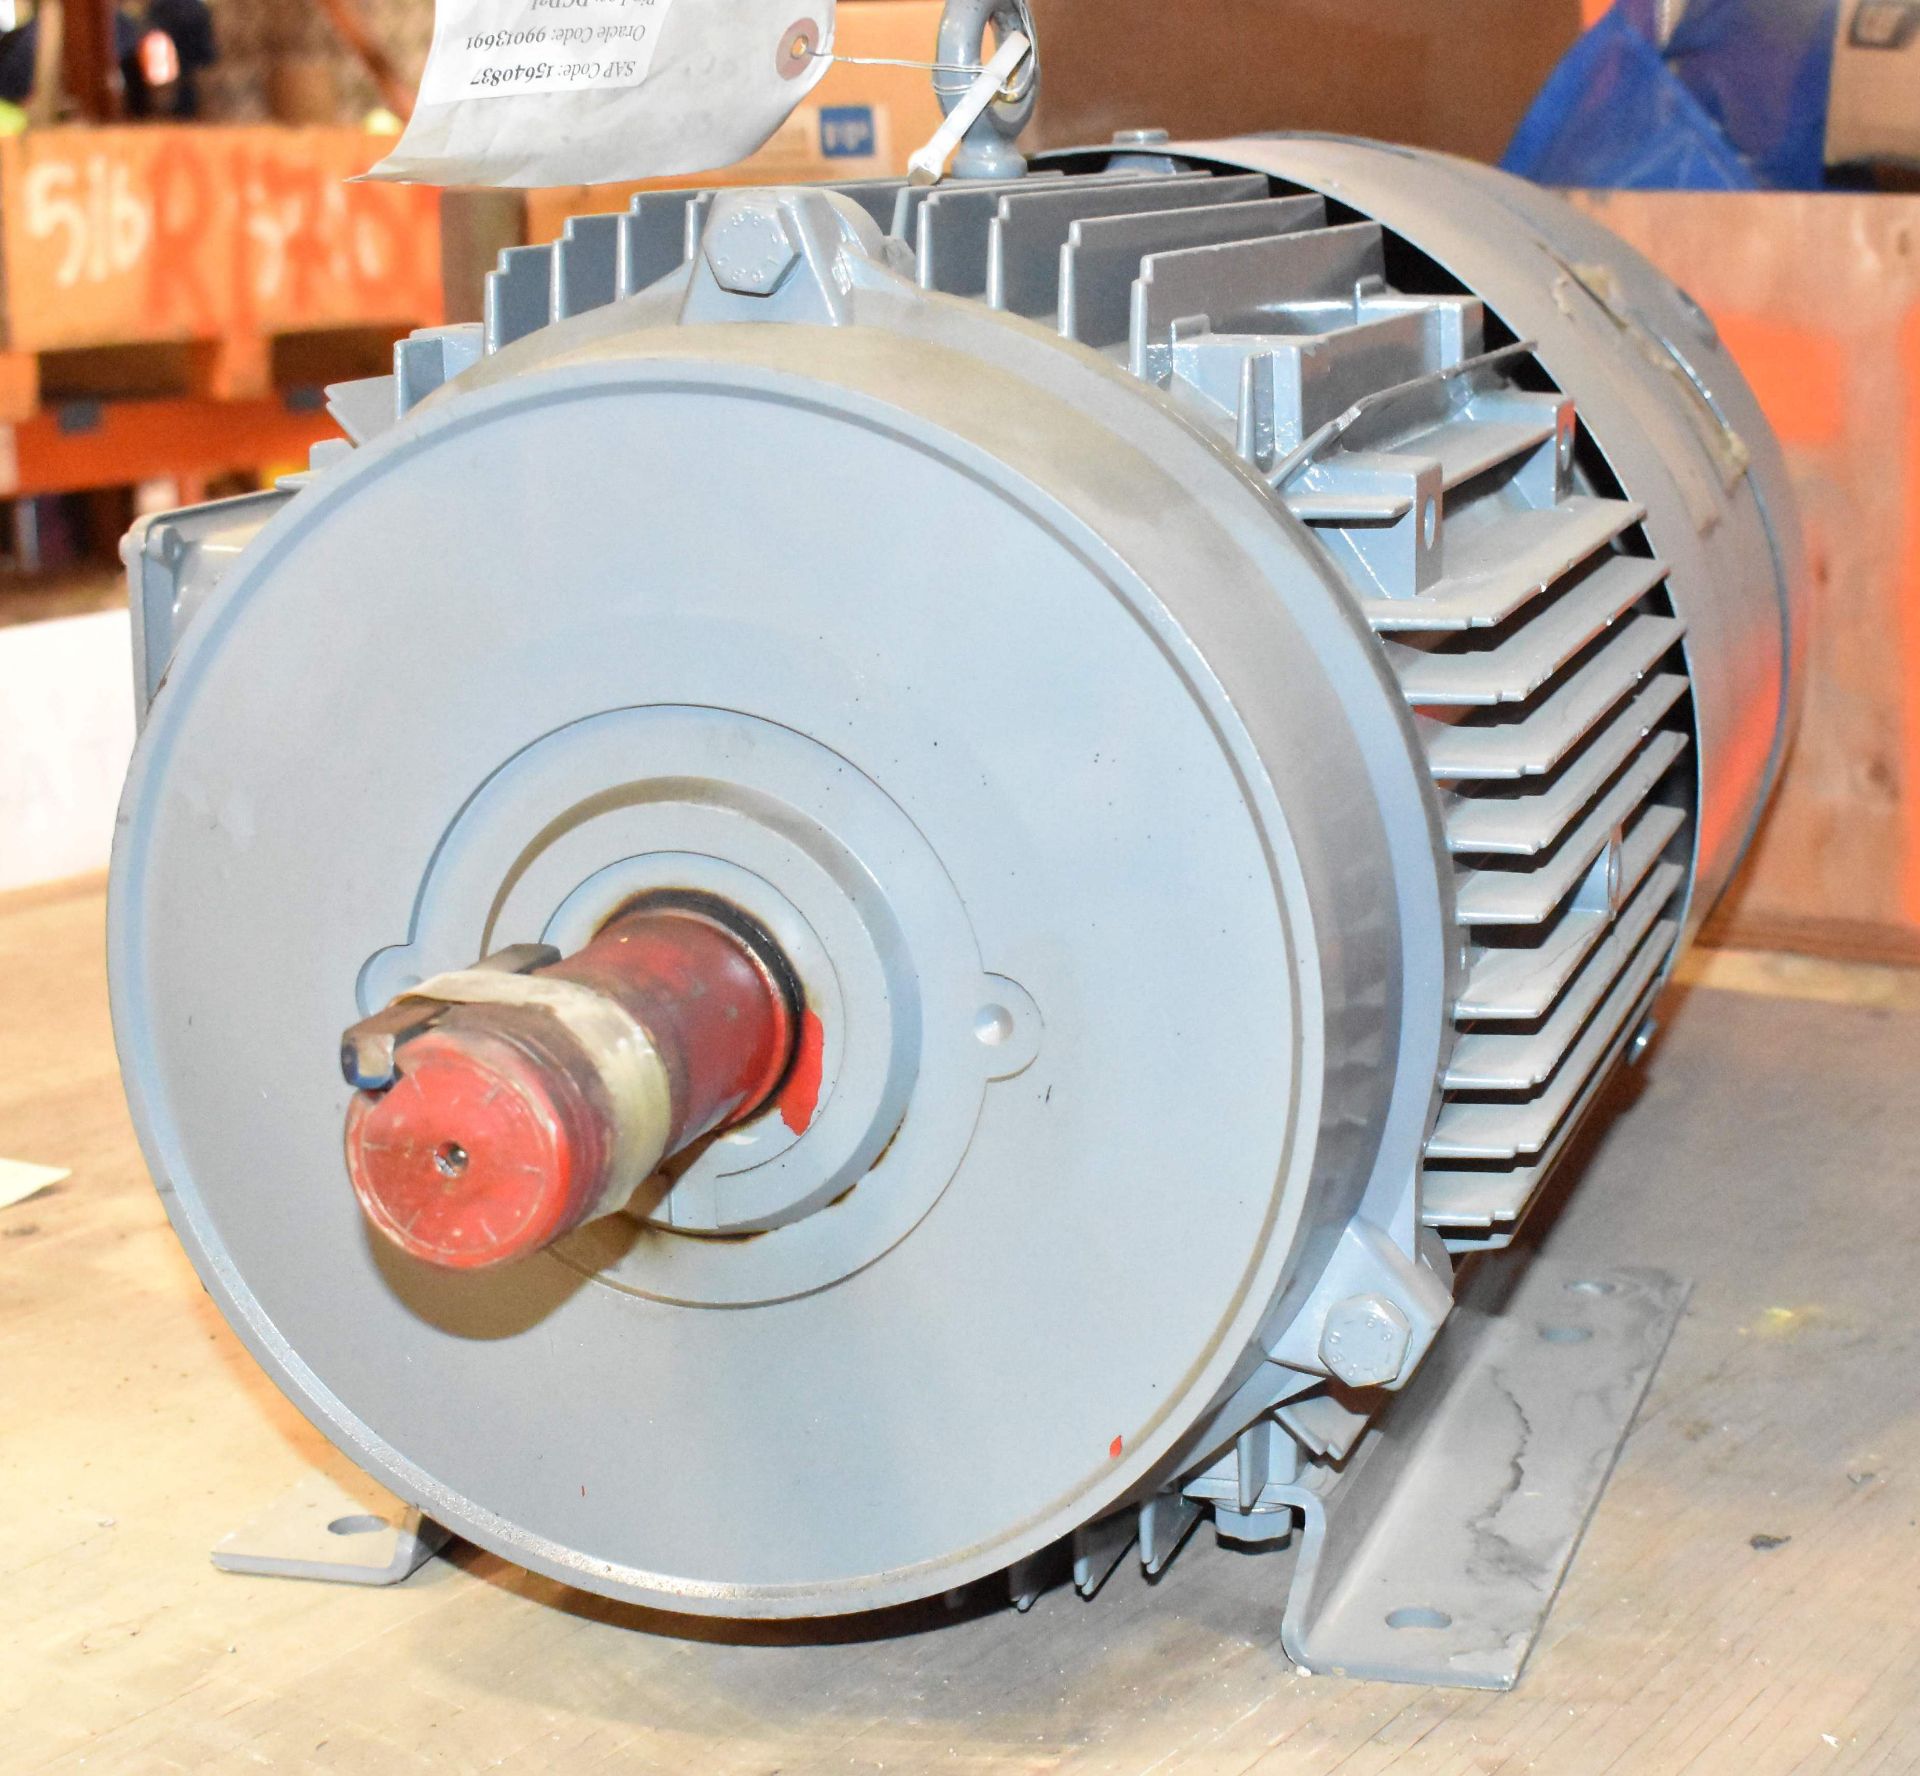 HAWKER-SIDDELEY 5 HP ELECTRIC MOTOR WITH 575V, 3PH, 60HZ (CMD WAREHOUSE - 10060202) - Image 2 of 3